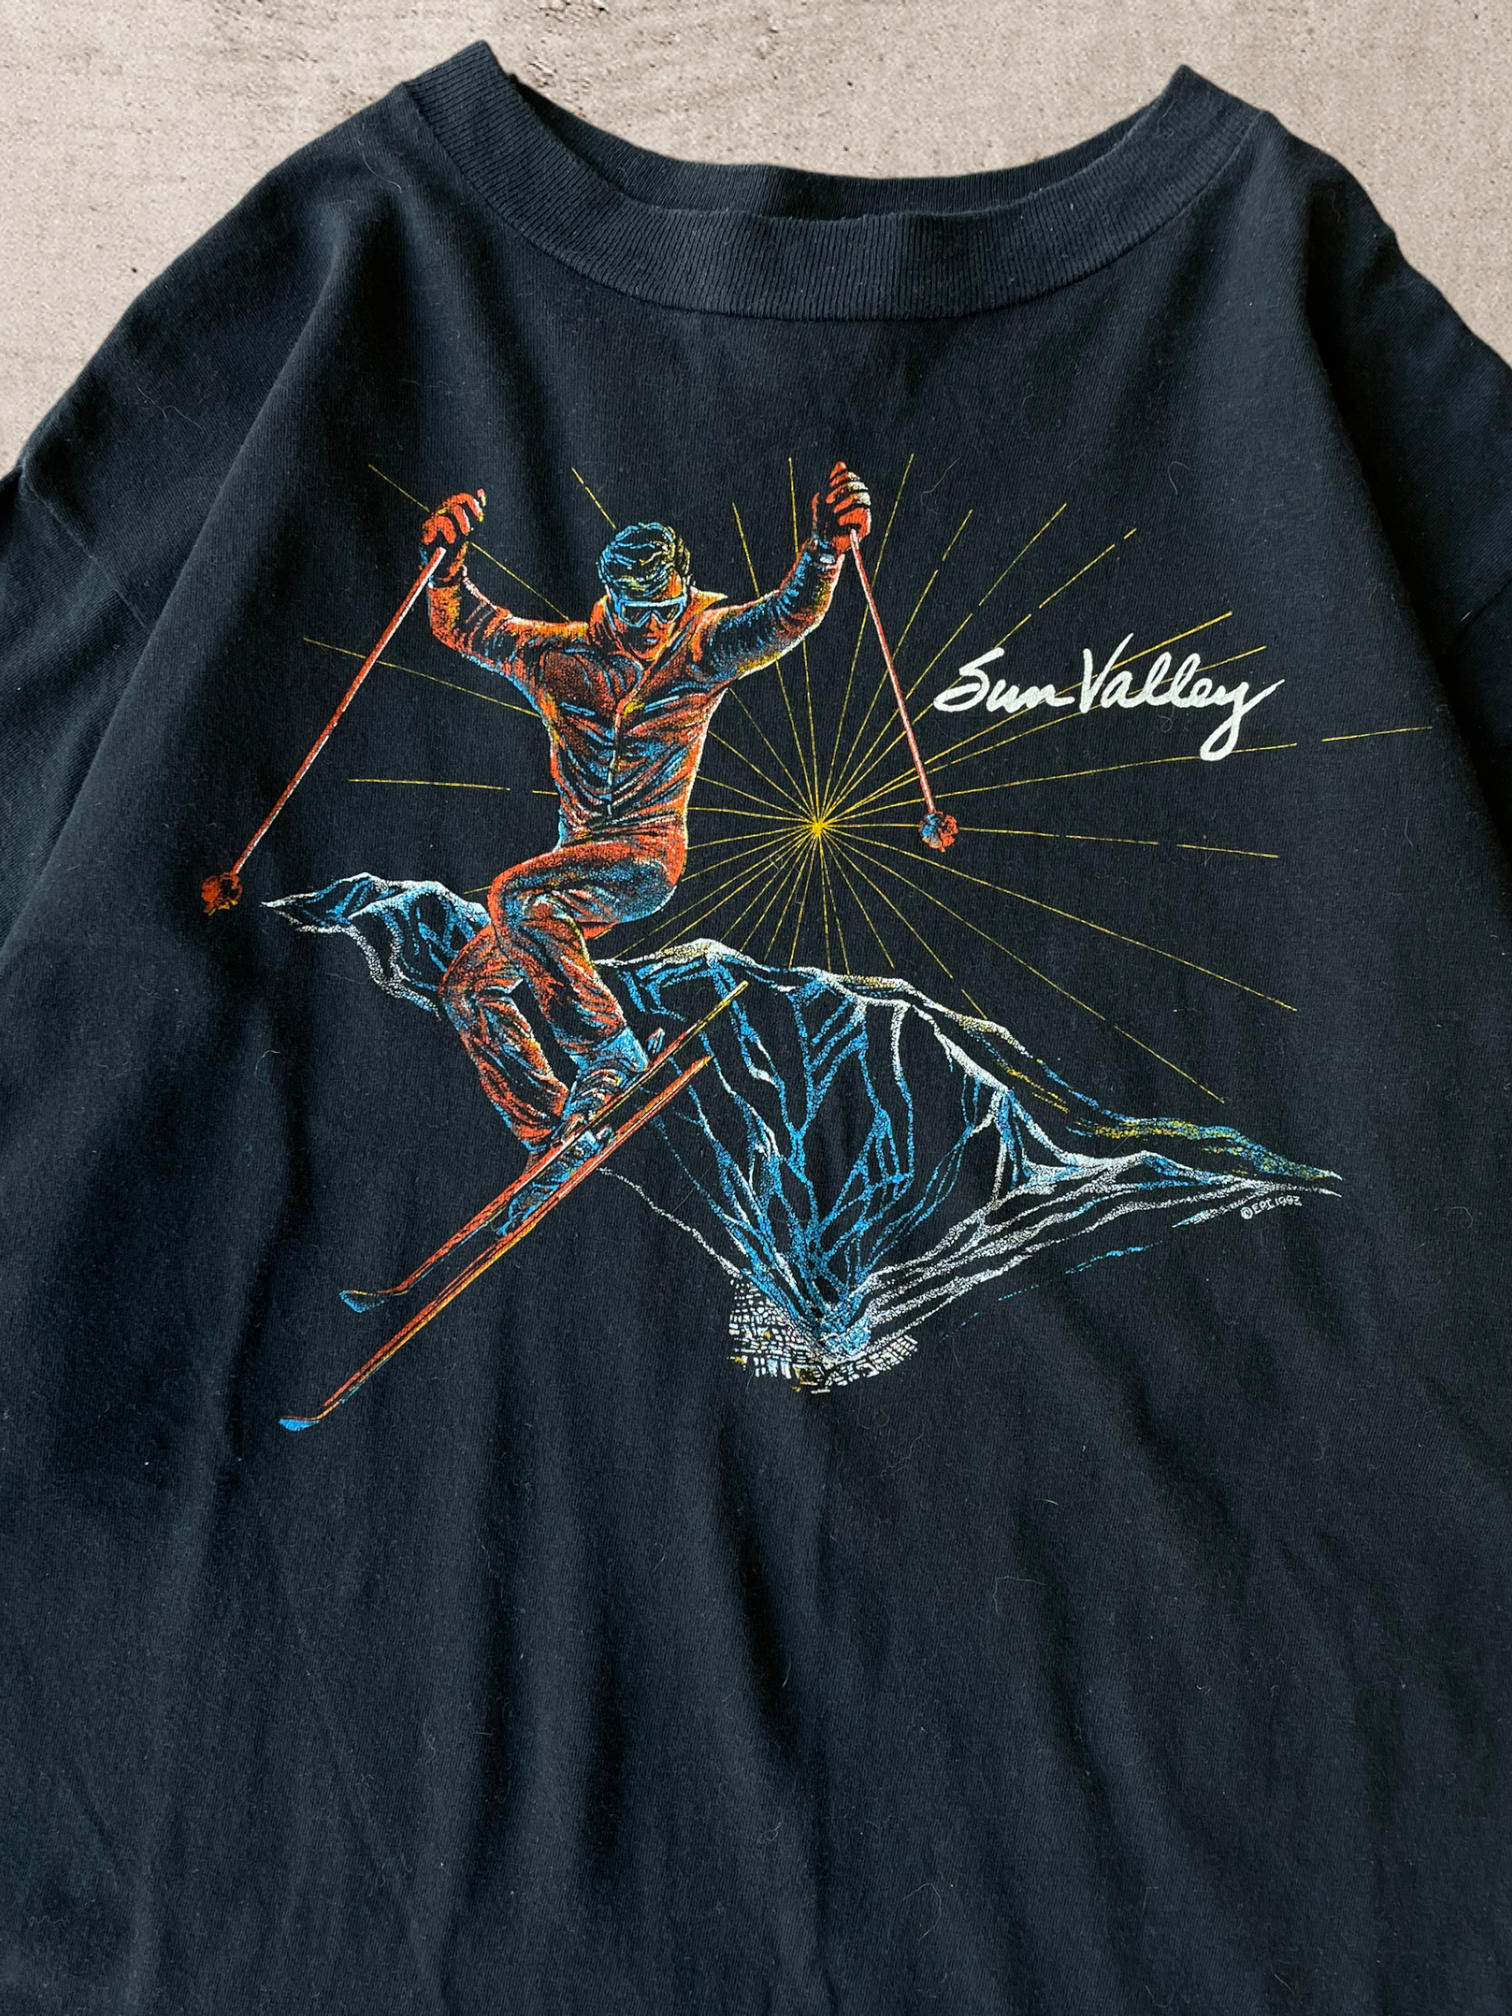 90s Sun Valley Skiing T-Shirt - Large